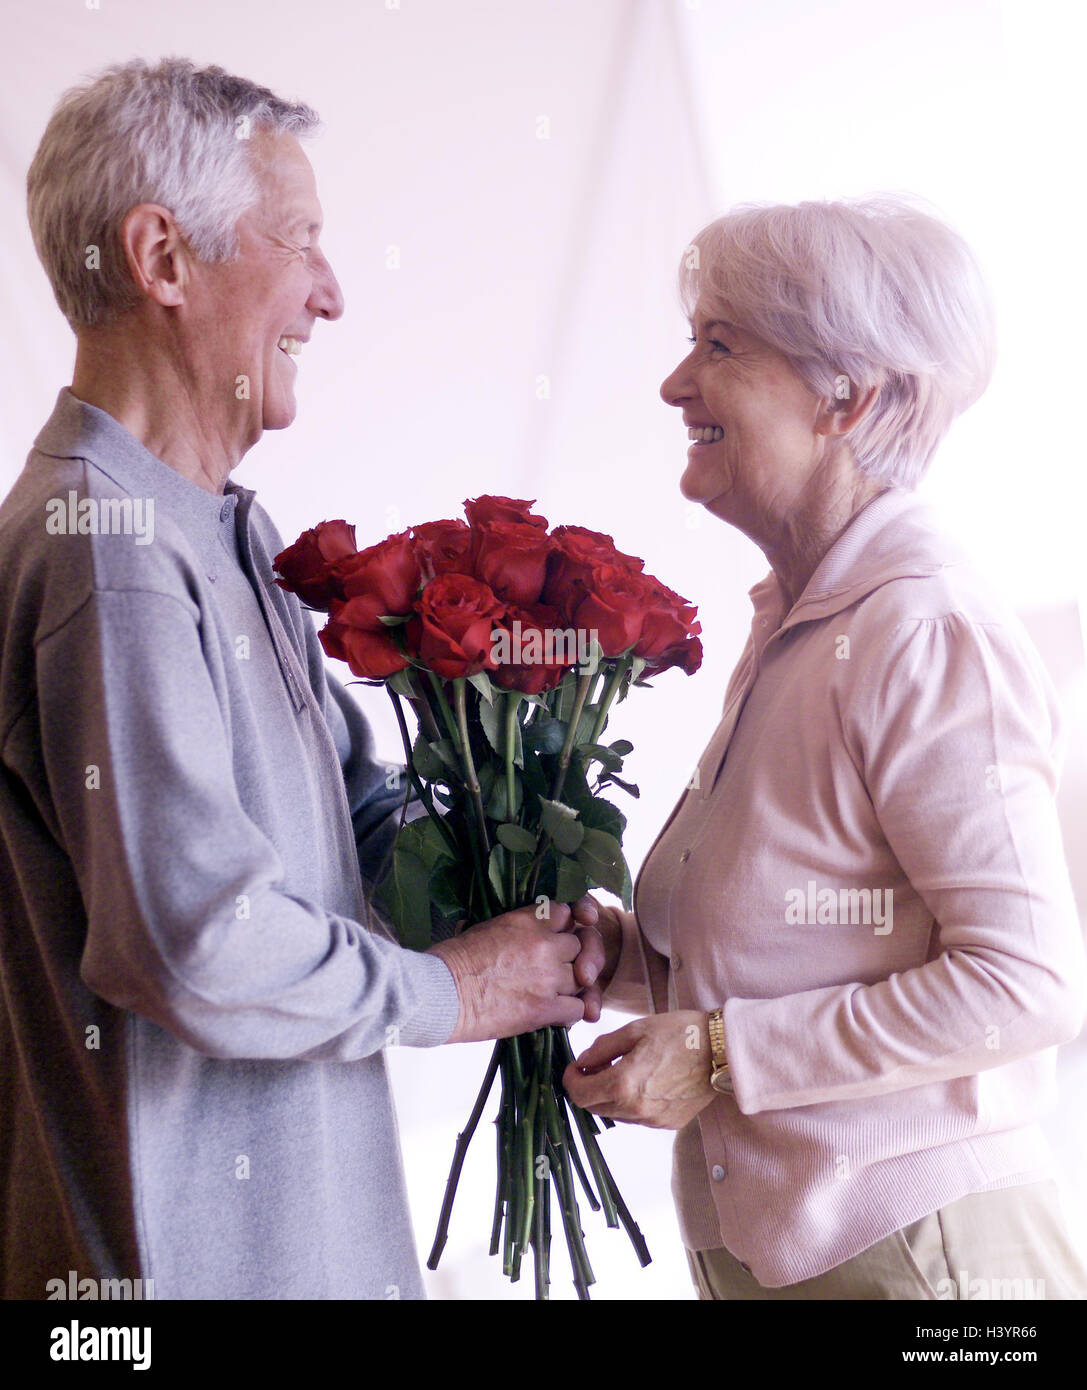 Senior citizen's couple, bunch of roses, hand, eye contact, at the side, couple, senior citizens, old person, 55 - 65 years, 50-60 years, 60-70 years, Best of all Age, middle old person, bouquet, flowers, roses, rose gentleman, marriage proposal, present, attention, surprise, love, affection, allowance, partnership, dear proof, happily, Stock Photo